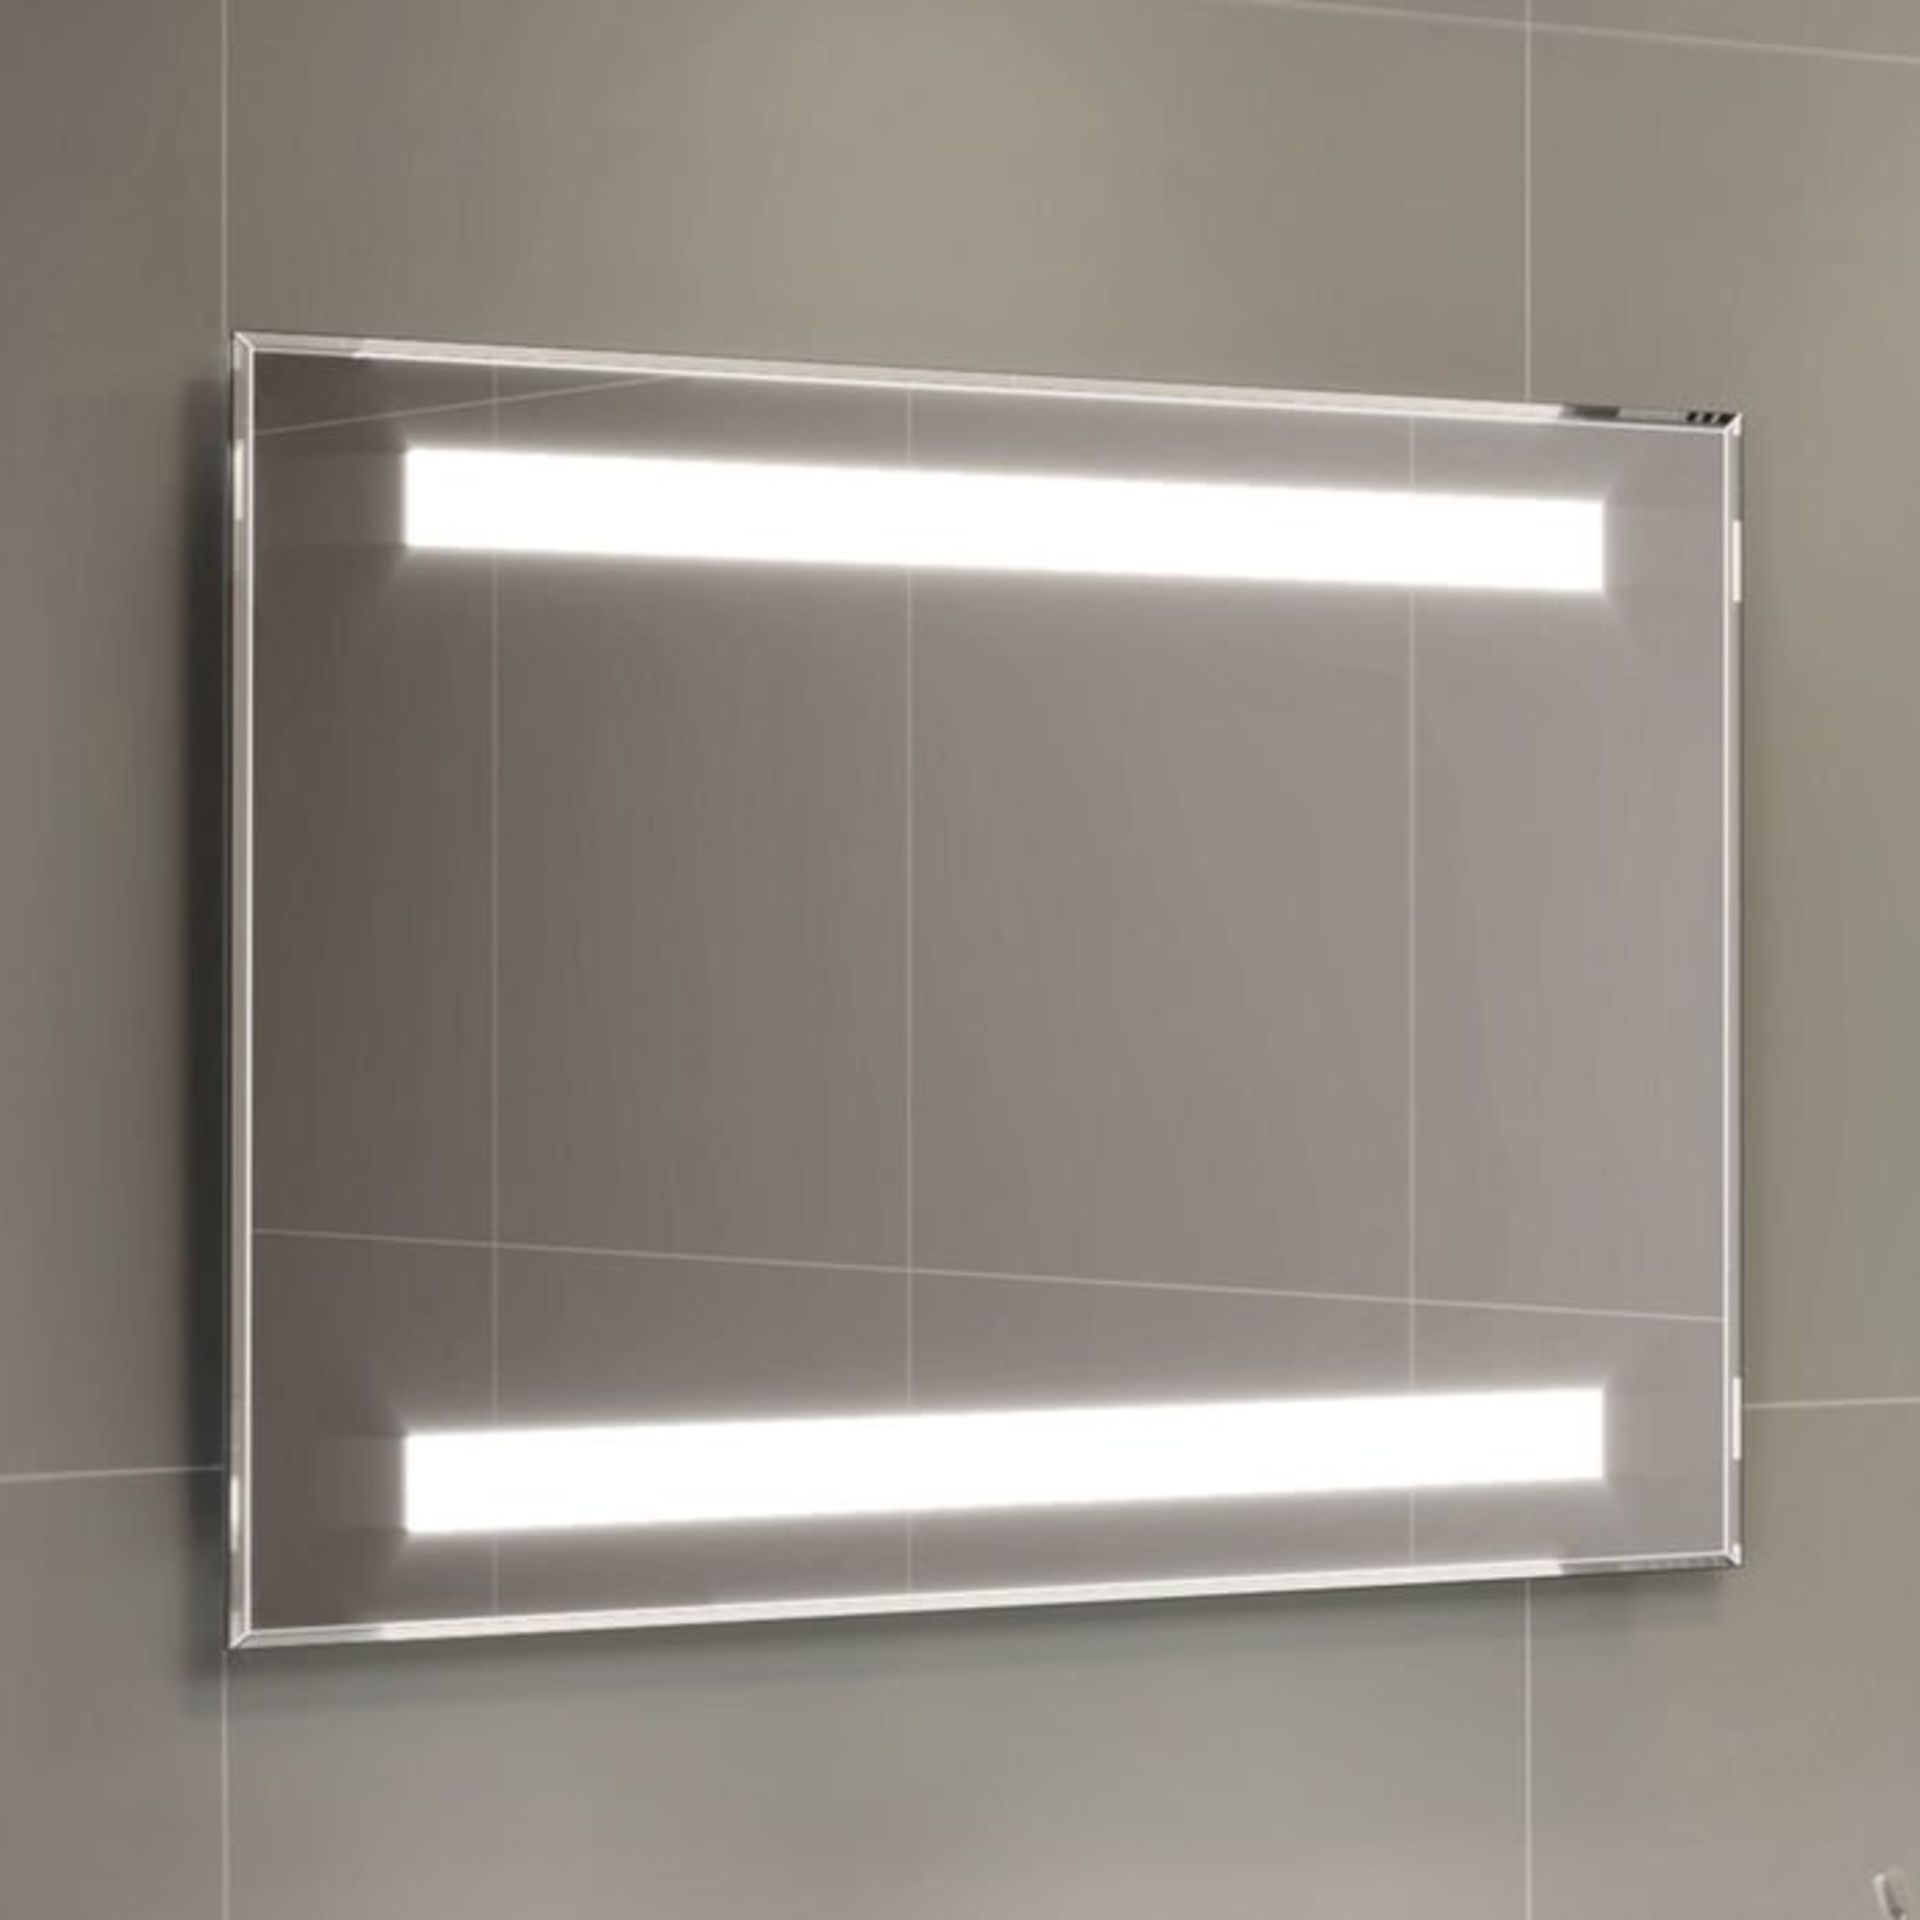 (V29) 500x700mm Omega LED Mirror - Battery Operated. Energy saving controlled On / Off switch - Image 3 of 3